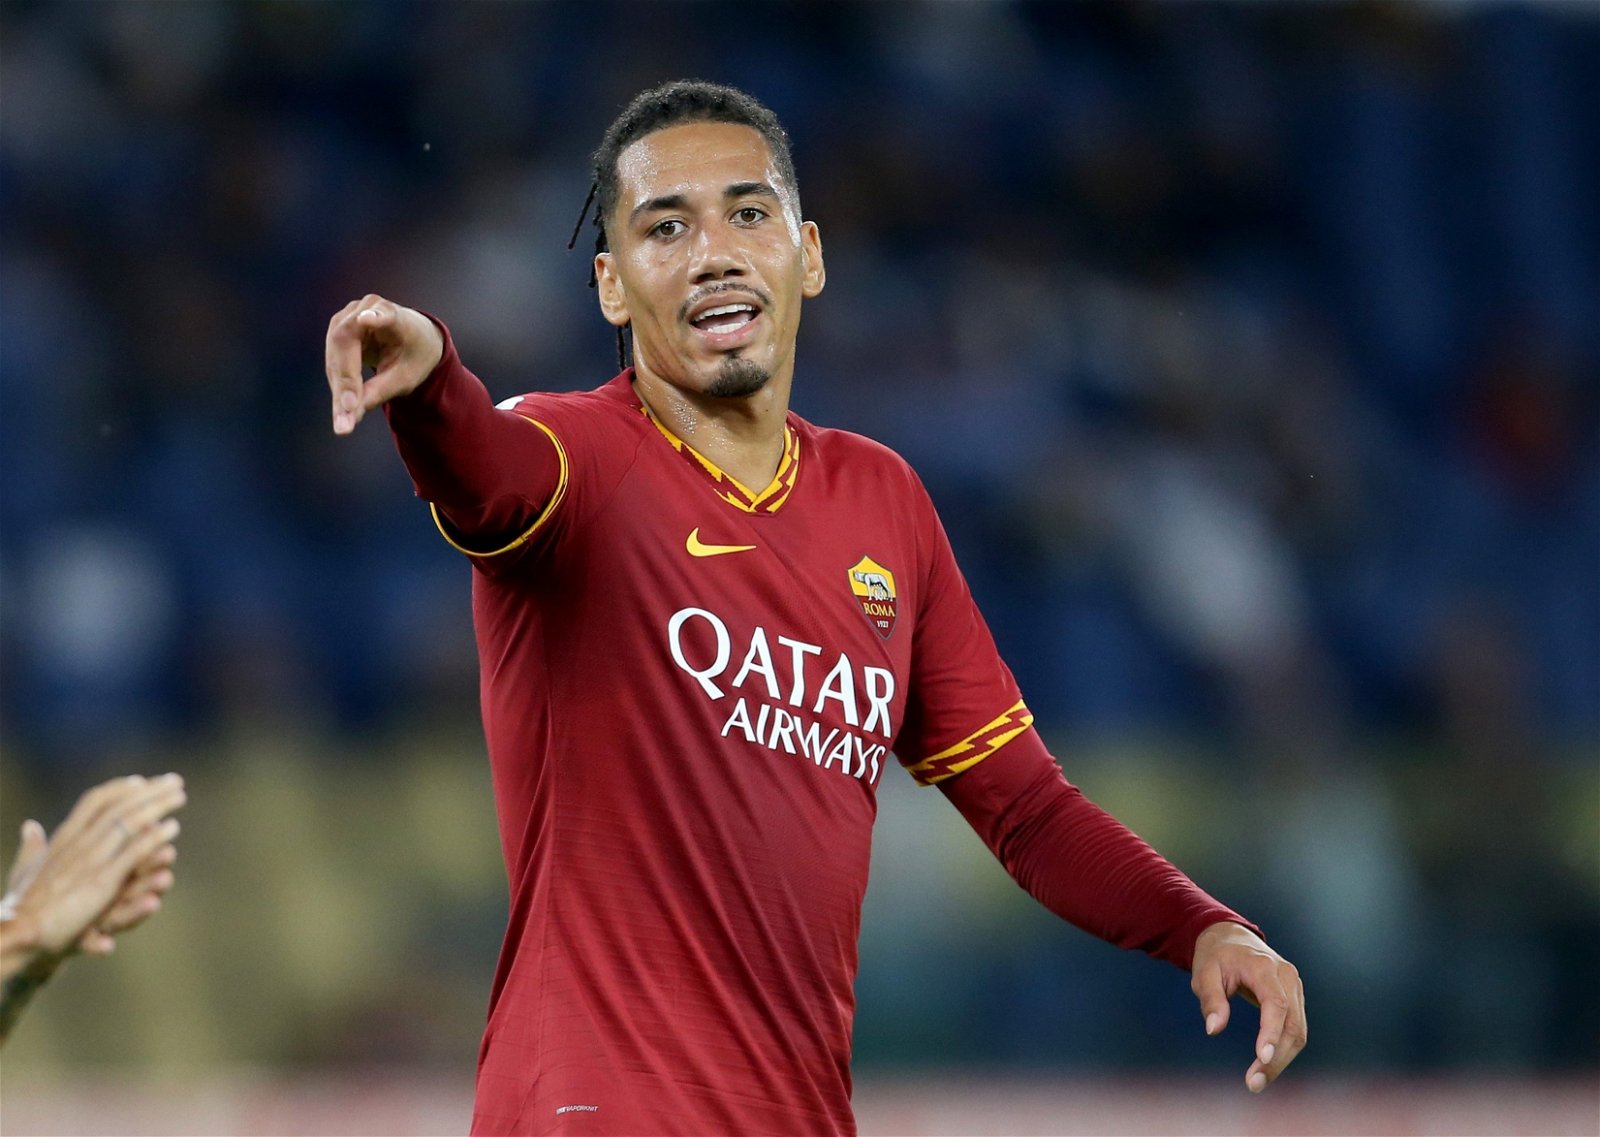 Roma working on deal to sign Manchester United's Chris Smalling permanently